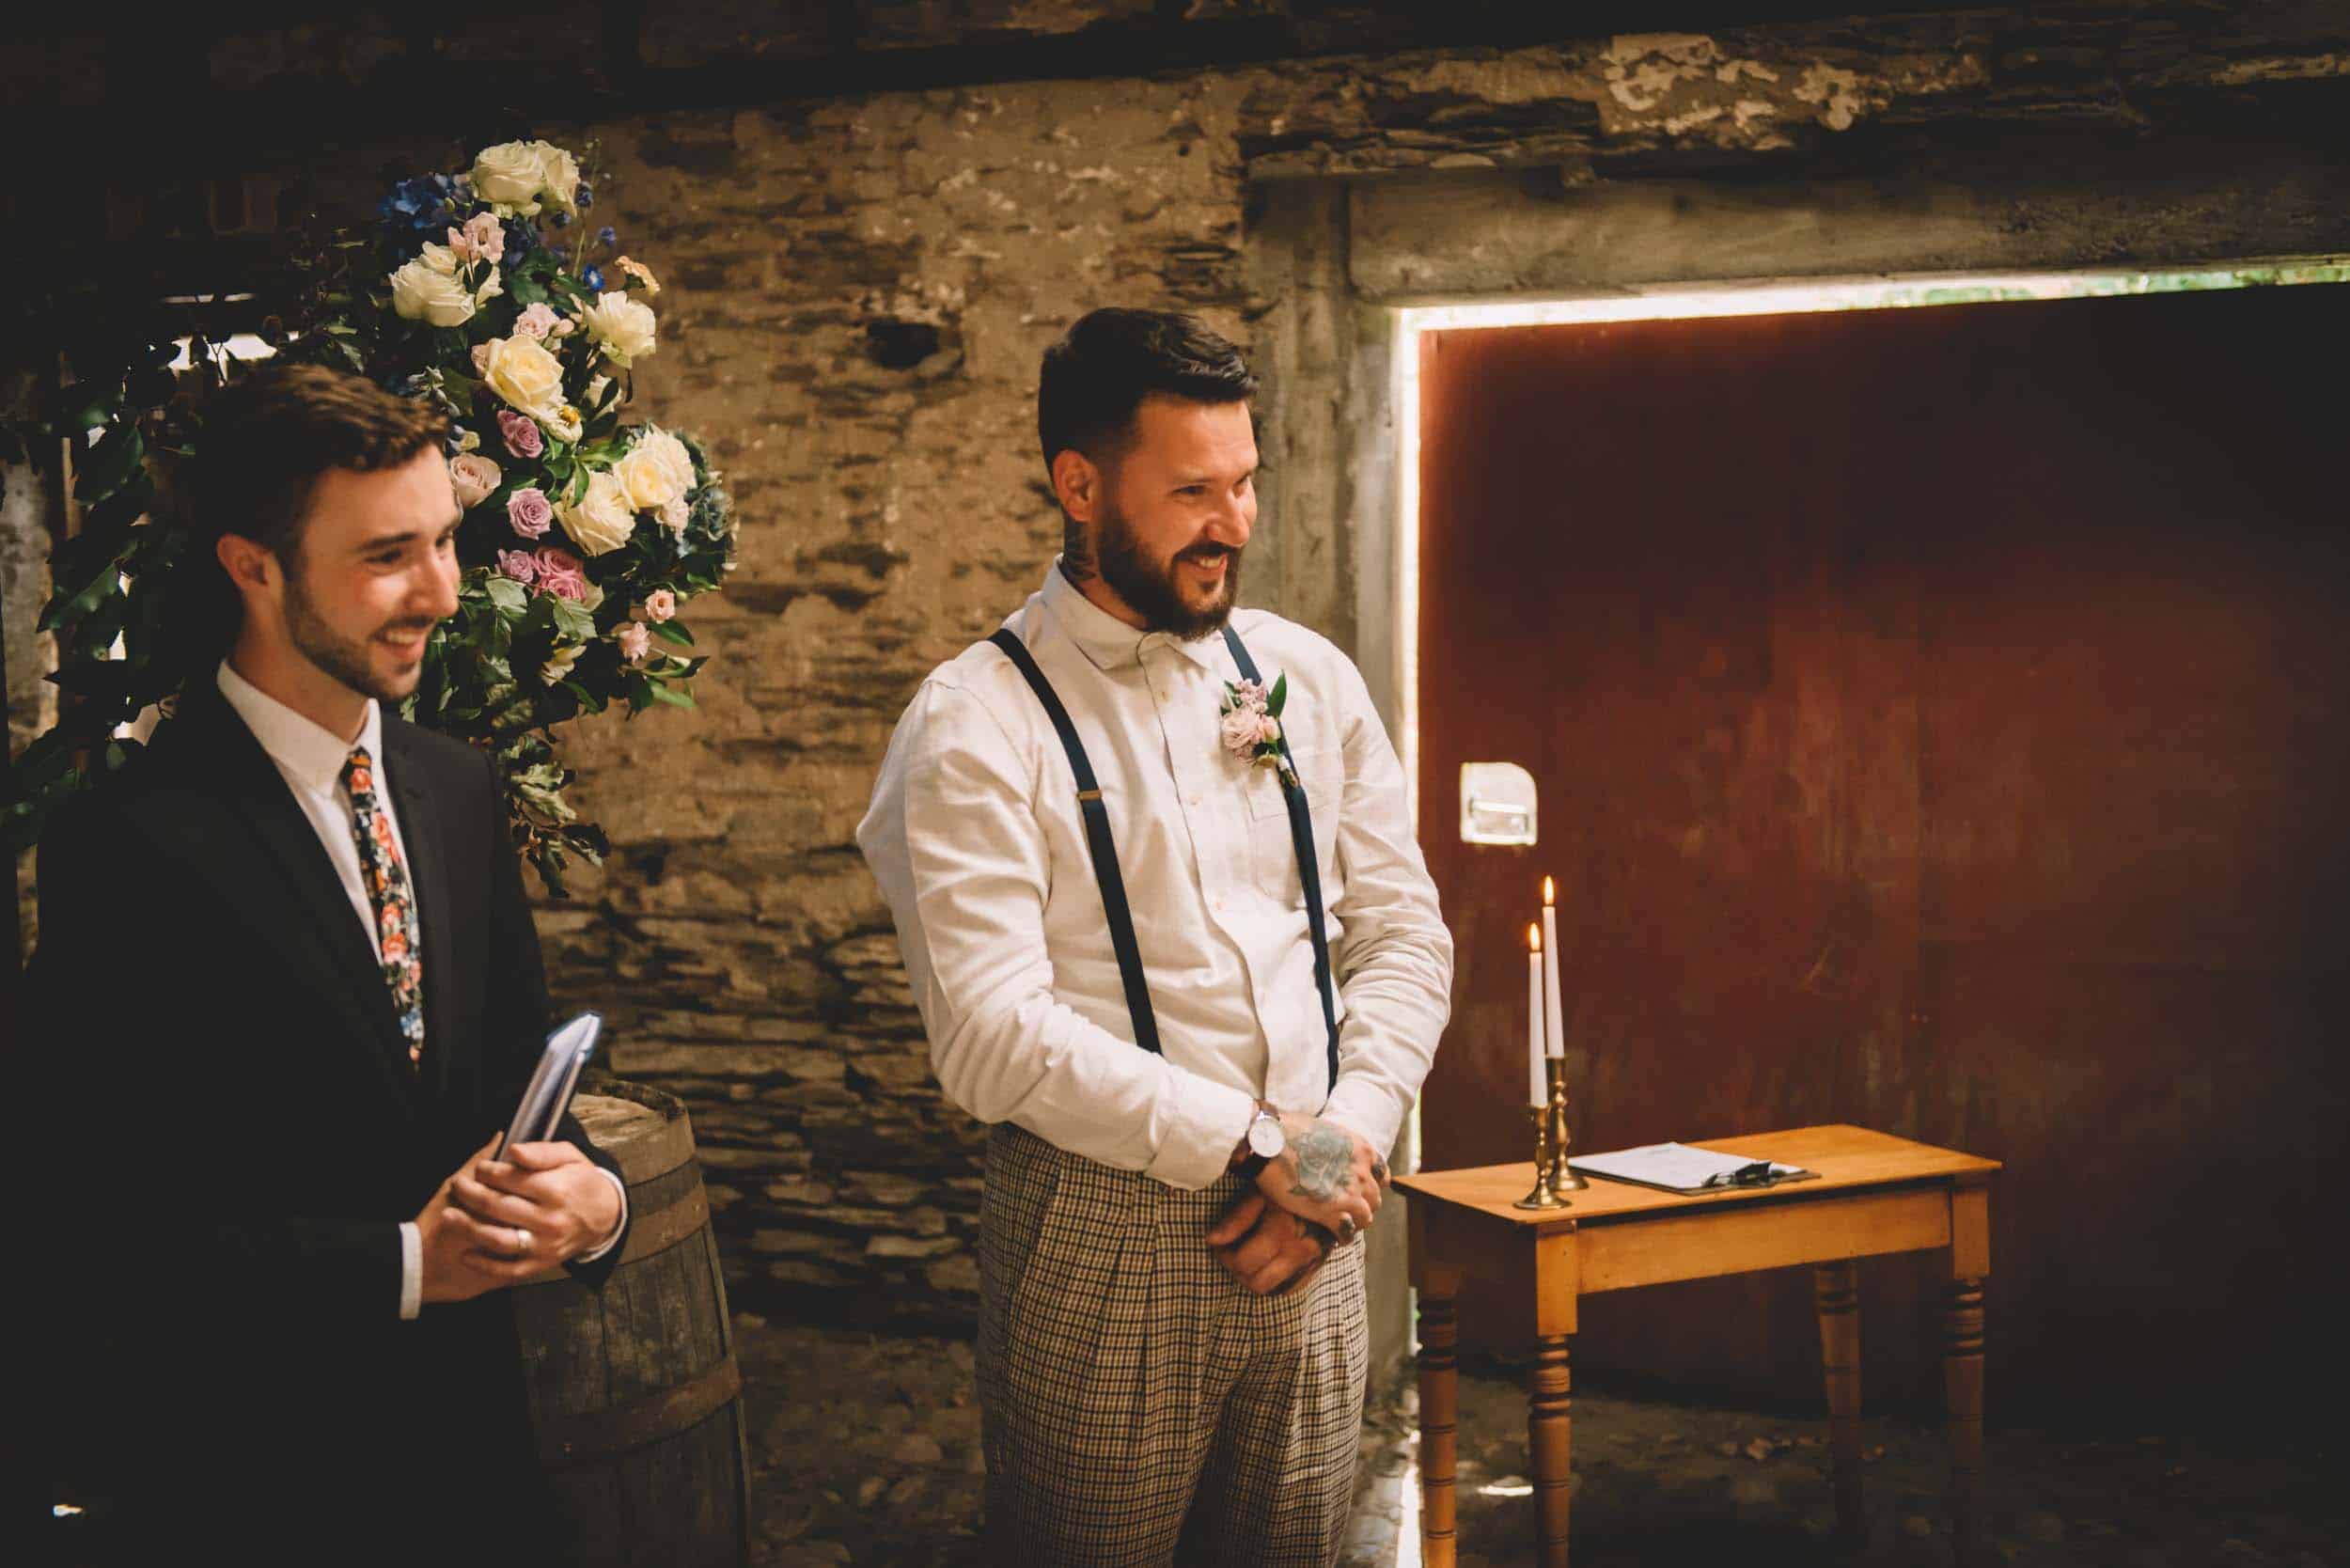 Nick & Nina's Thurlby Domain Elopement old stone stables wedding ceremony